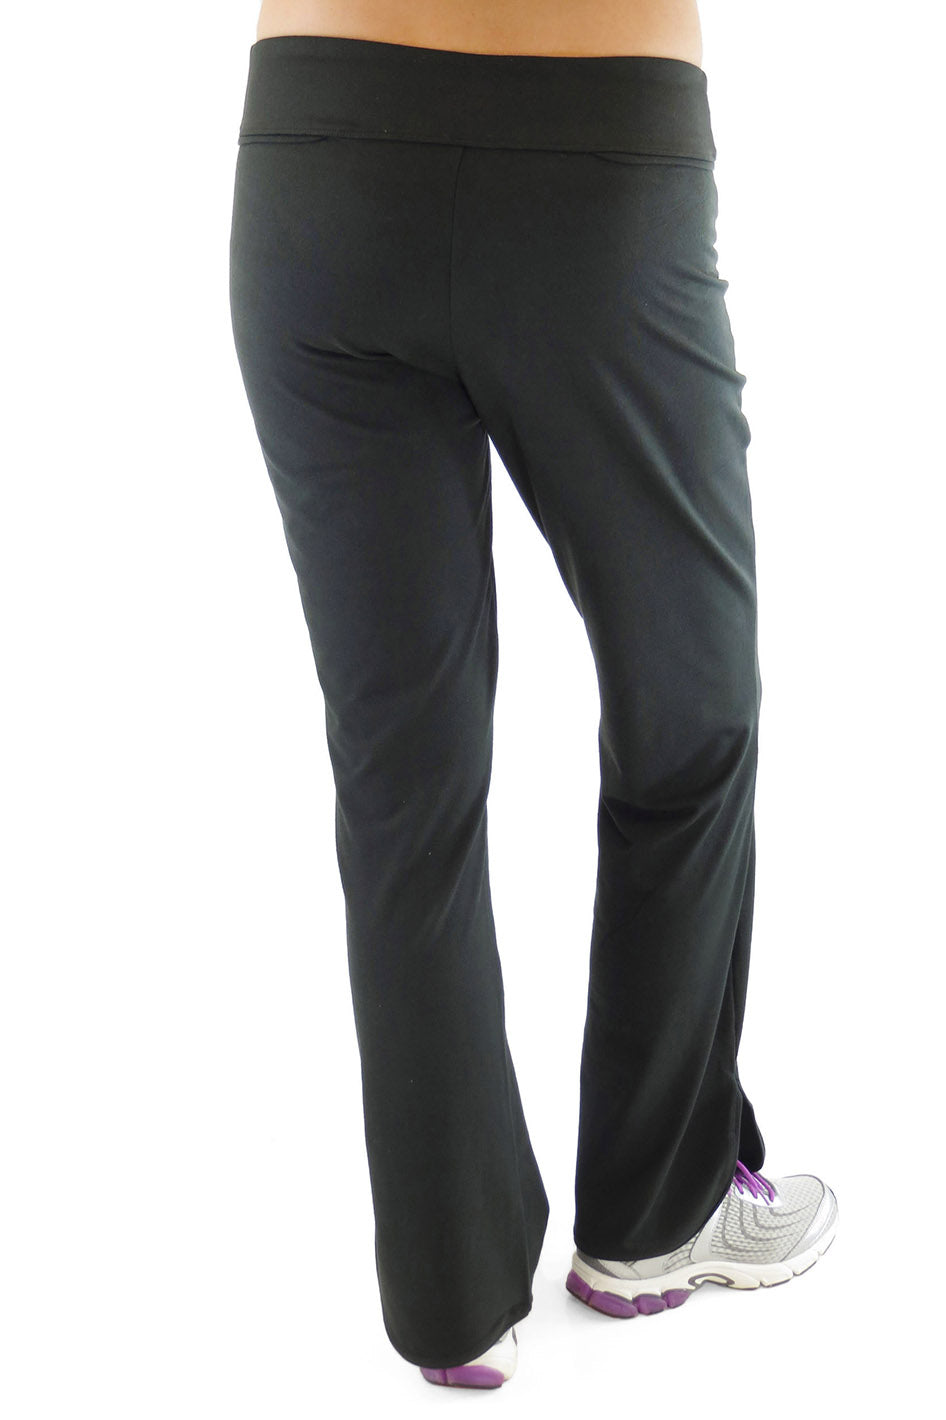 Reflect Relaxed Fit Yoga Pant, Women's Pants